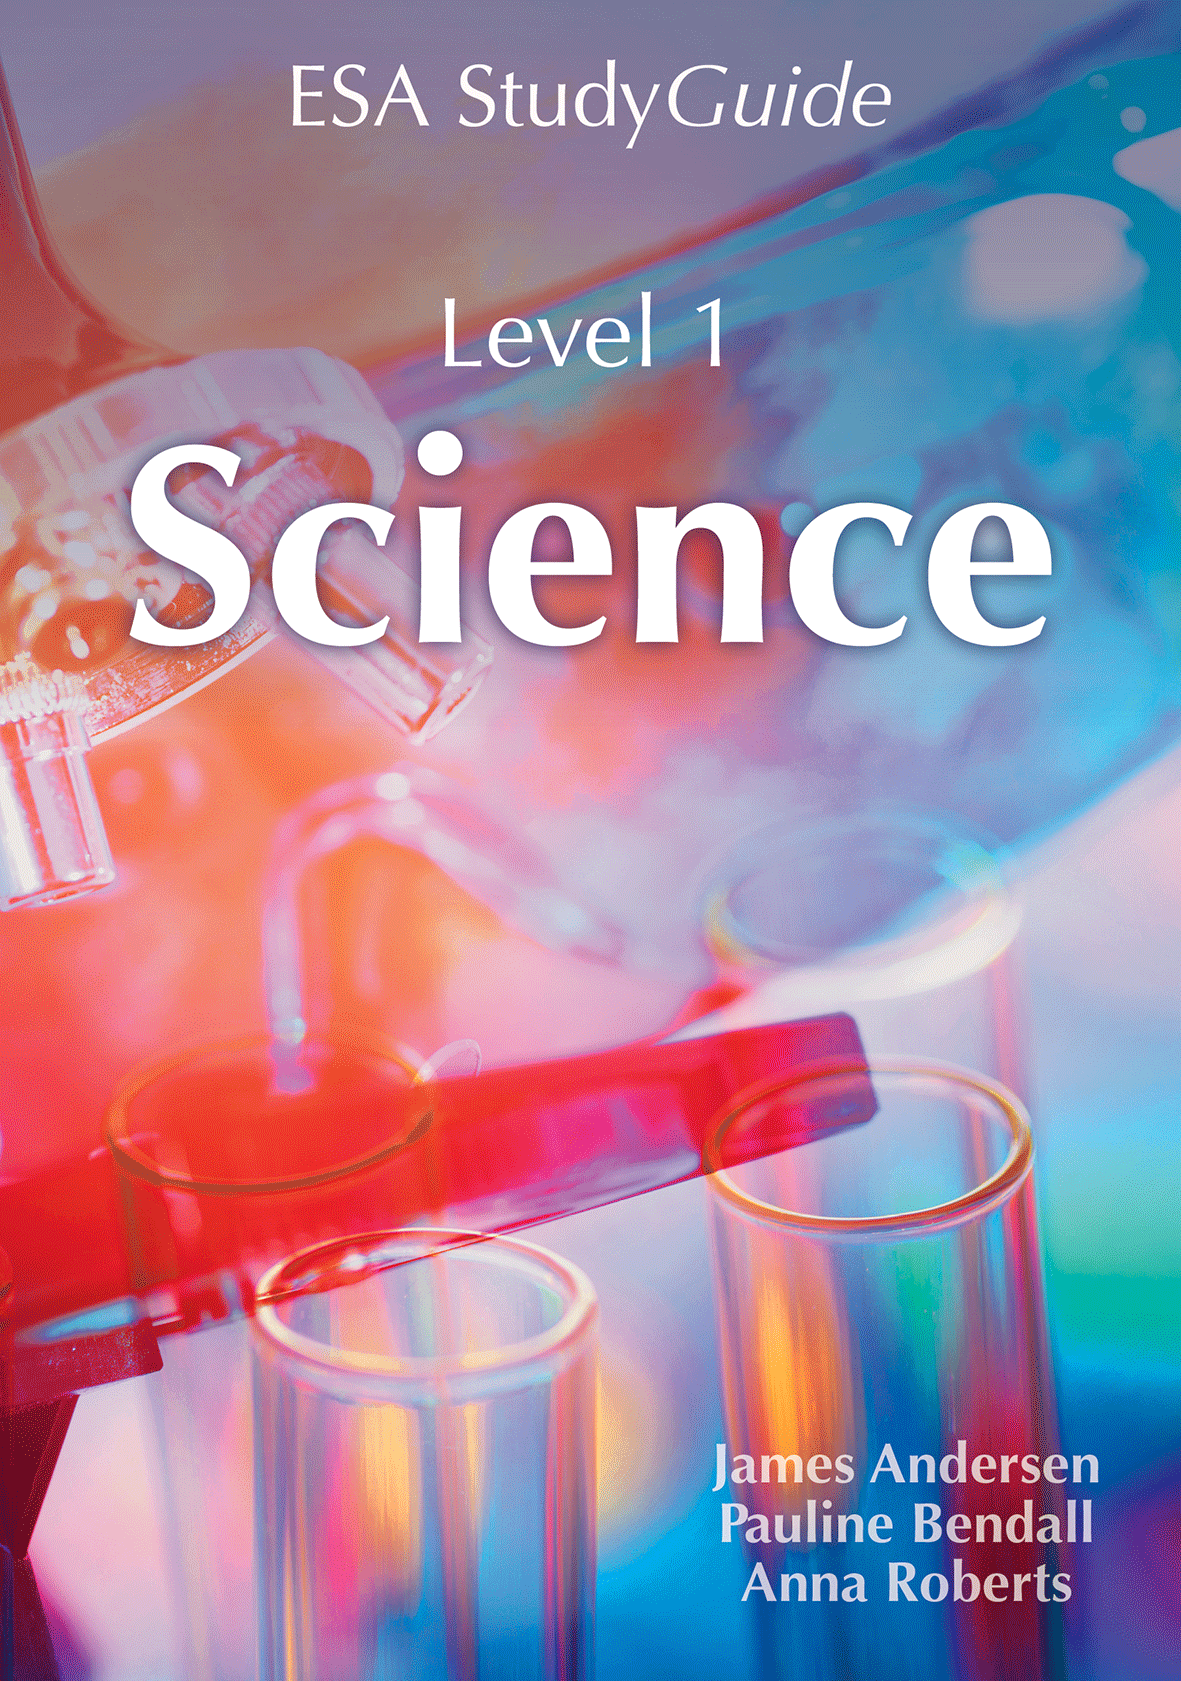 Level 1 Science ESA Study Guide